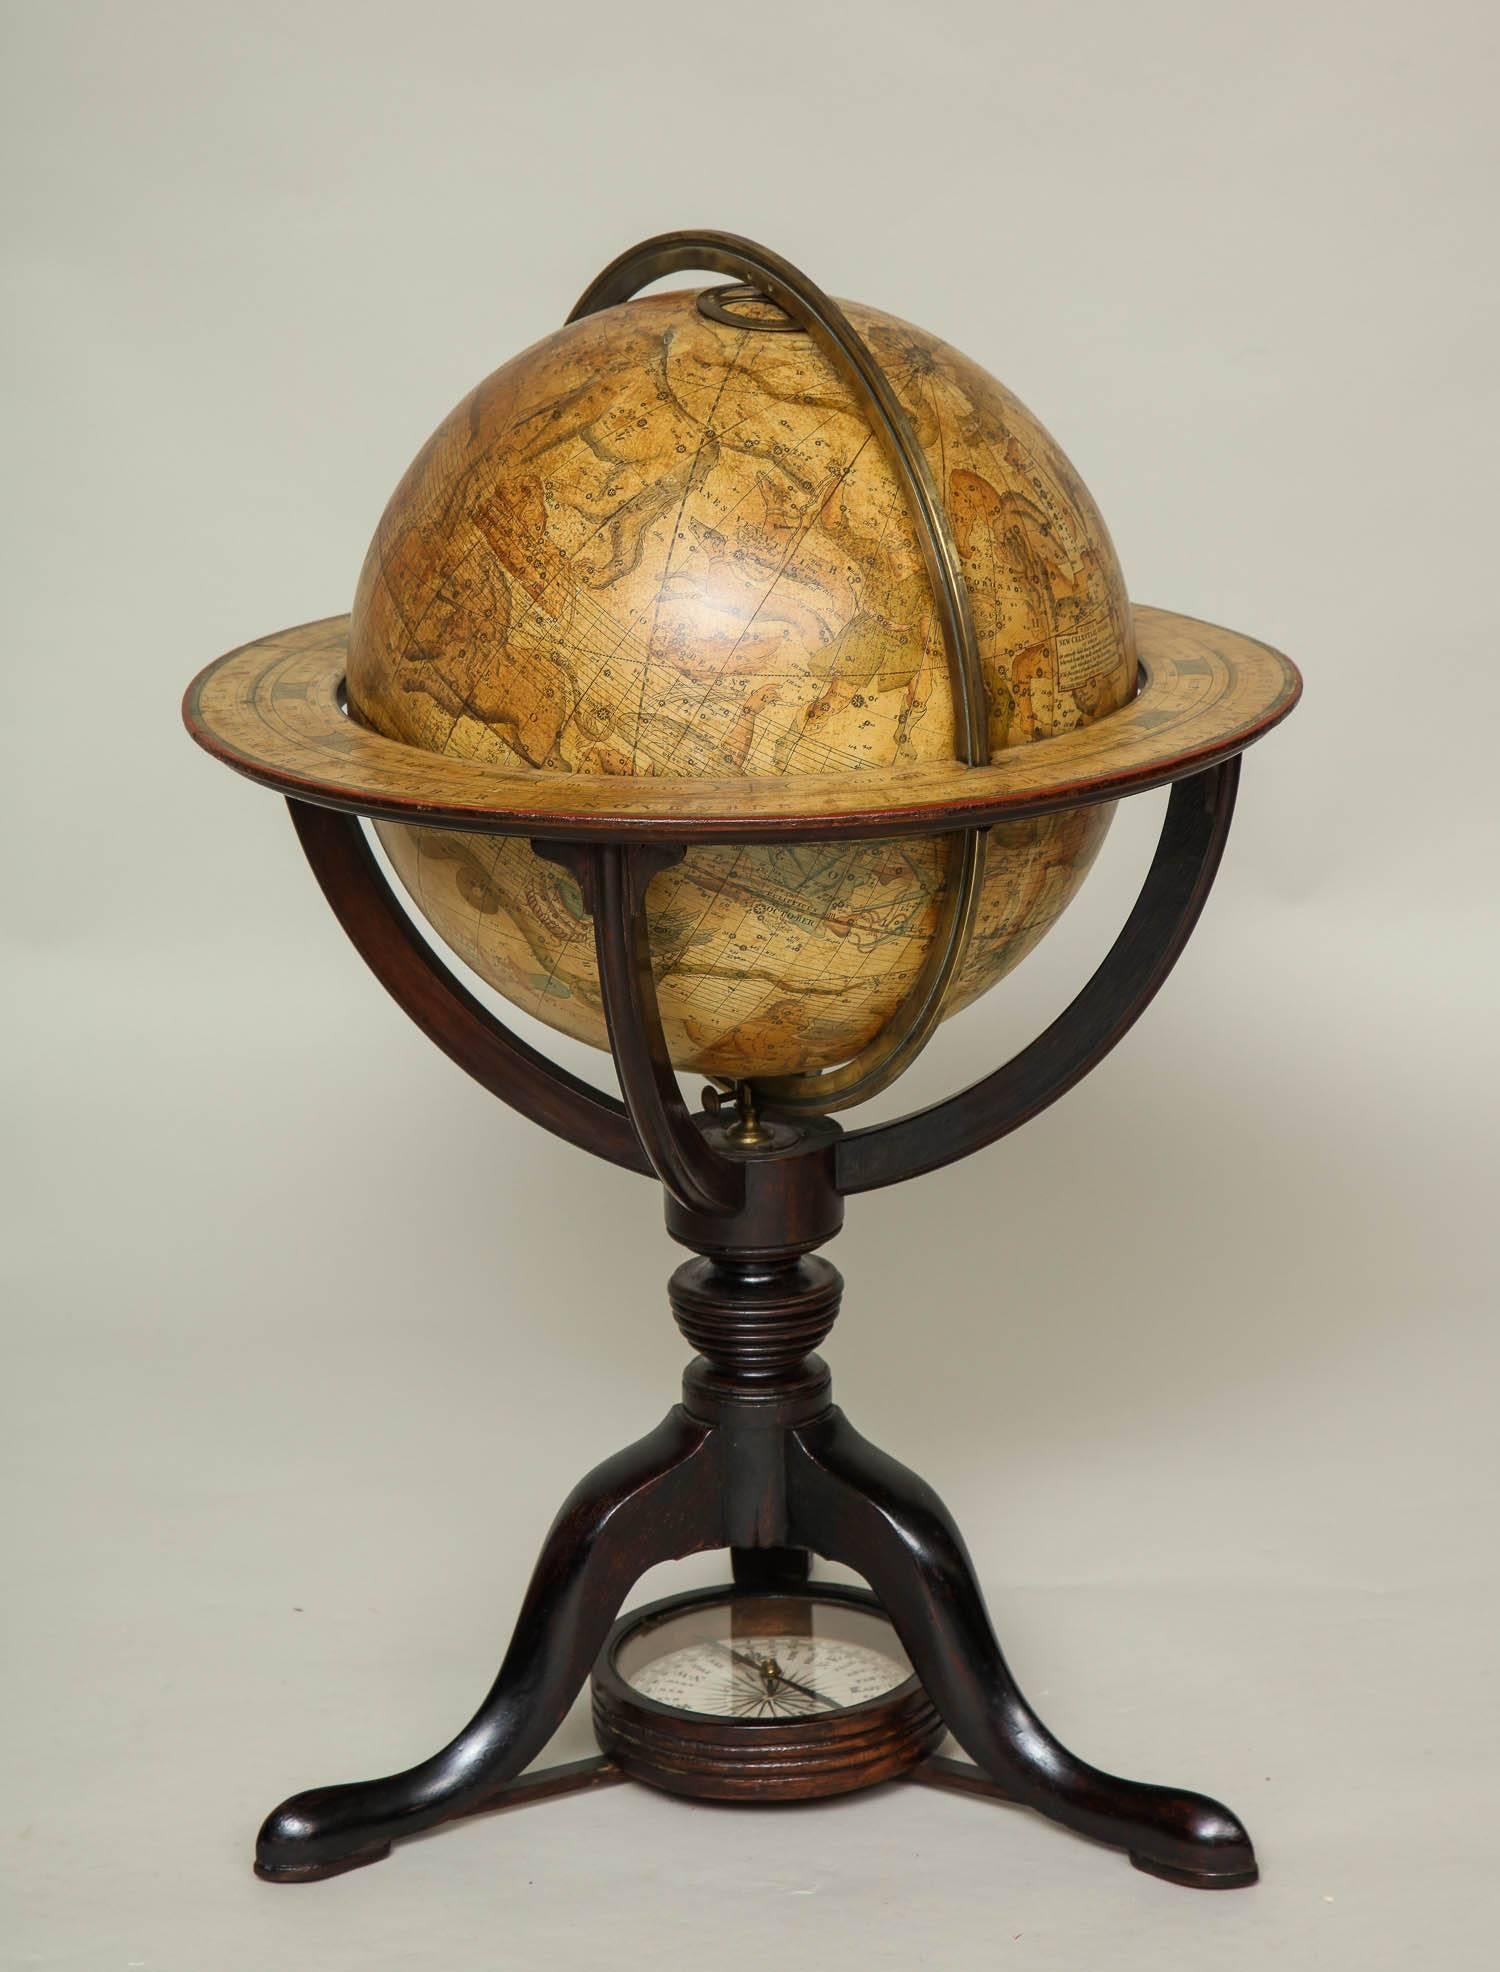 English Assembled Pair of Georgian Celestial and Terrestrial Globes